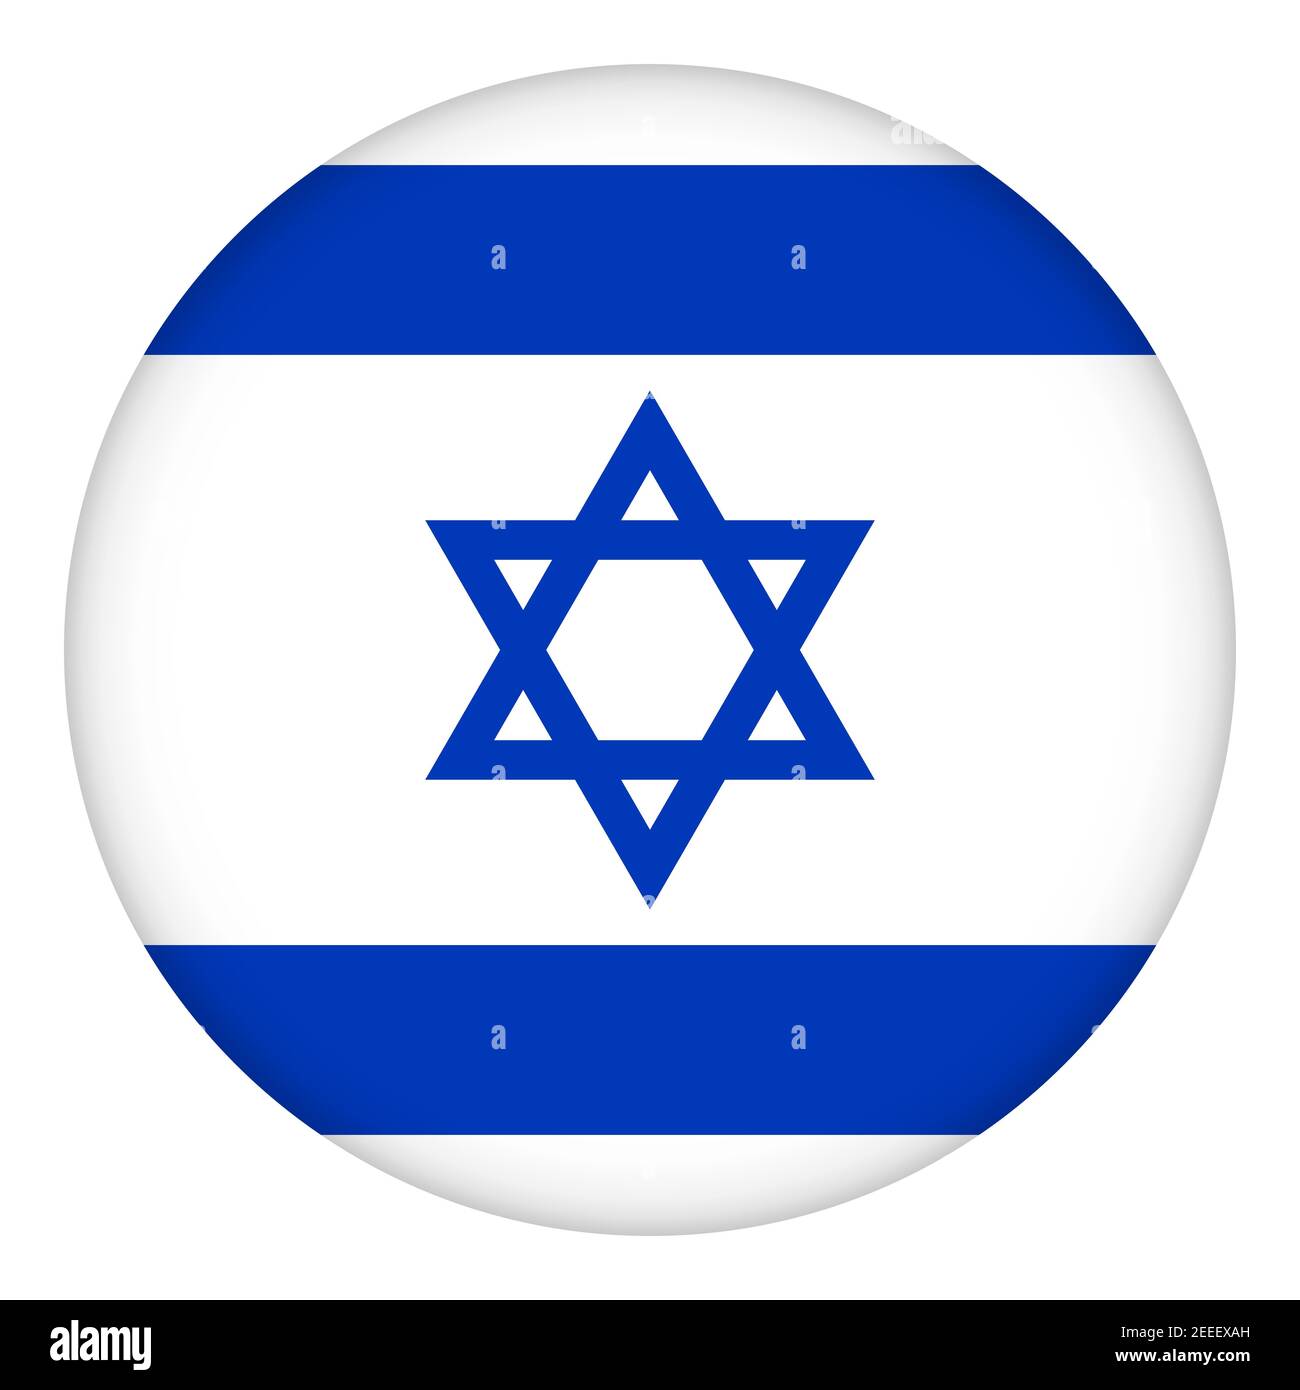 Flag of Israel round icon, badge or button. Israeli national